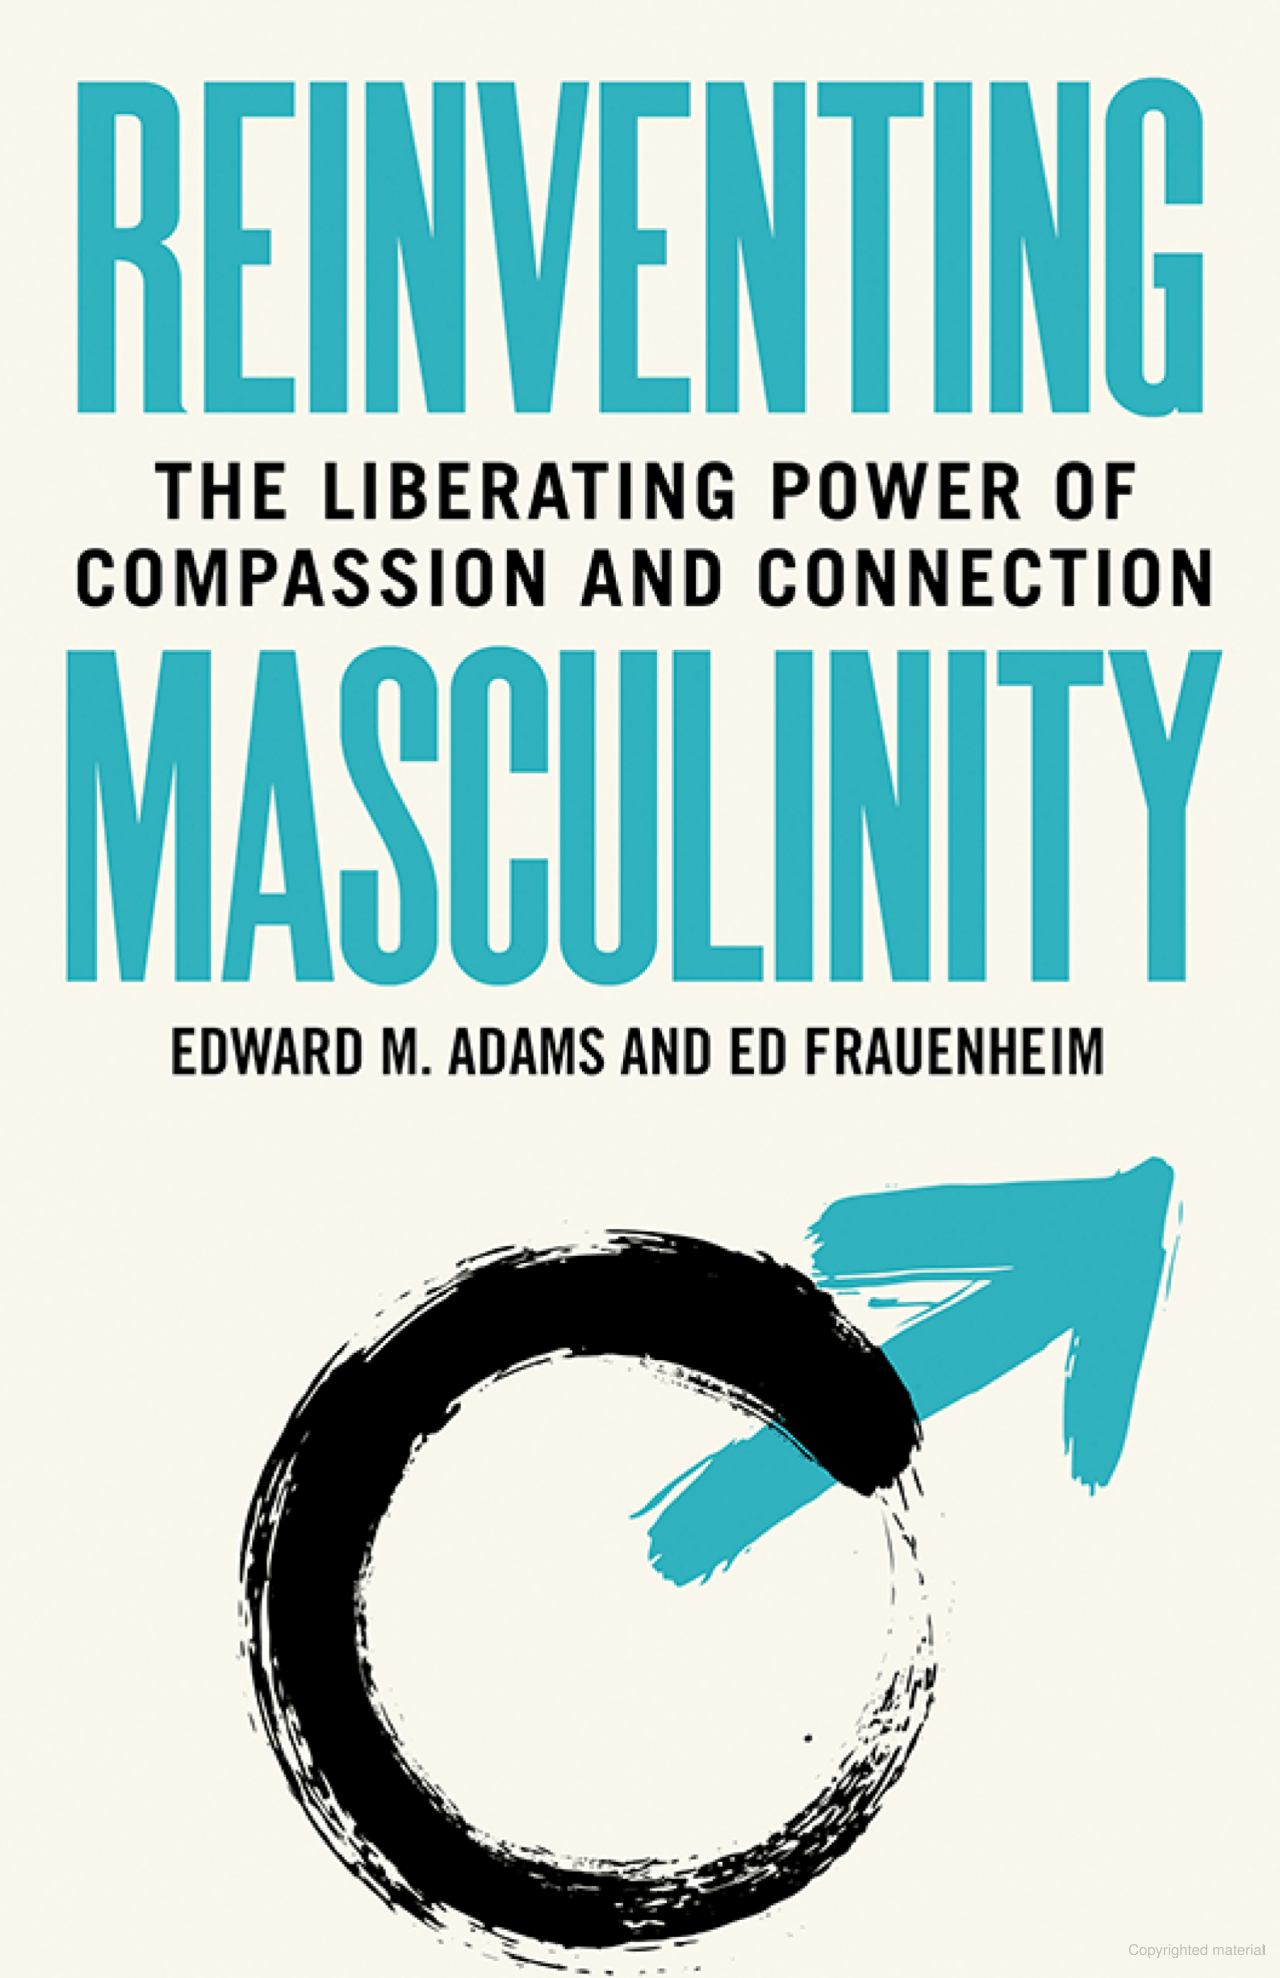 Reinventing masculinity: The Liberating Power of Compassion And Connection